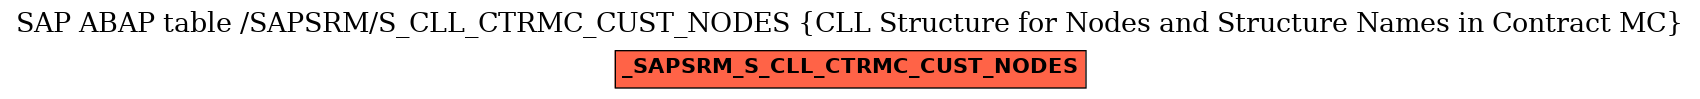 E-R Diagram for table /SAPSRM/S_CLL_CTRMC_CUST_NODES (CLL Structure for Nodes and Structure Names in Contract MC)